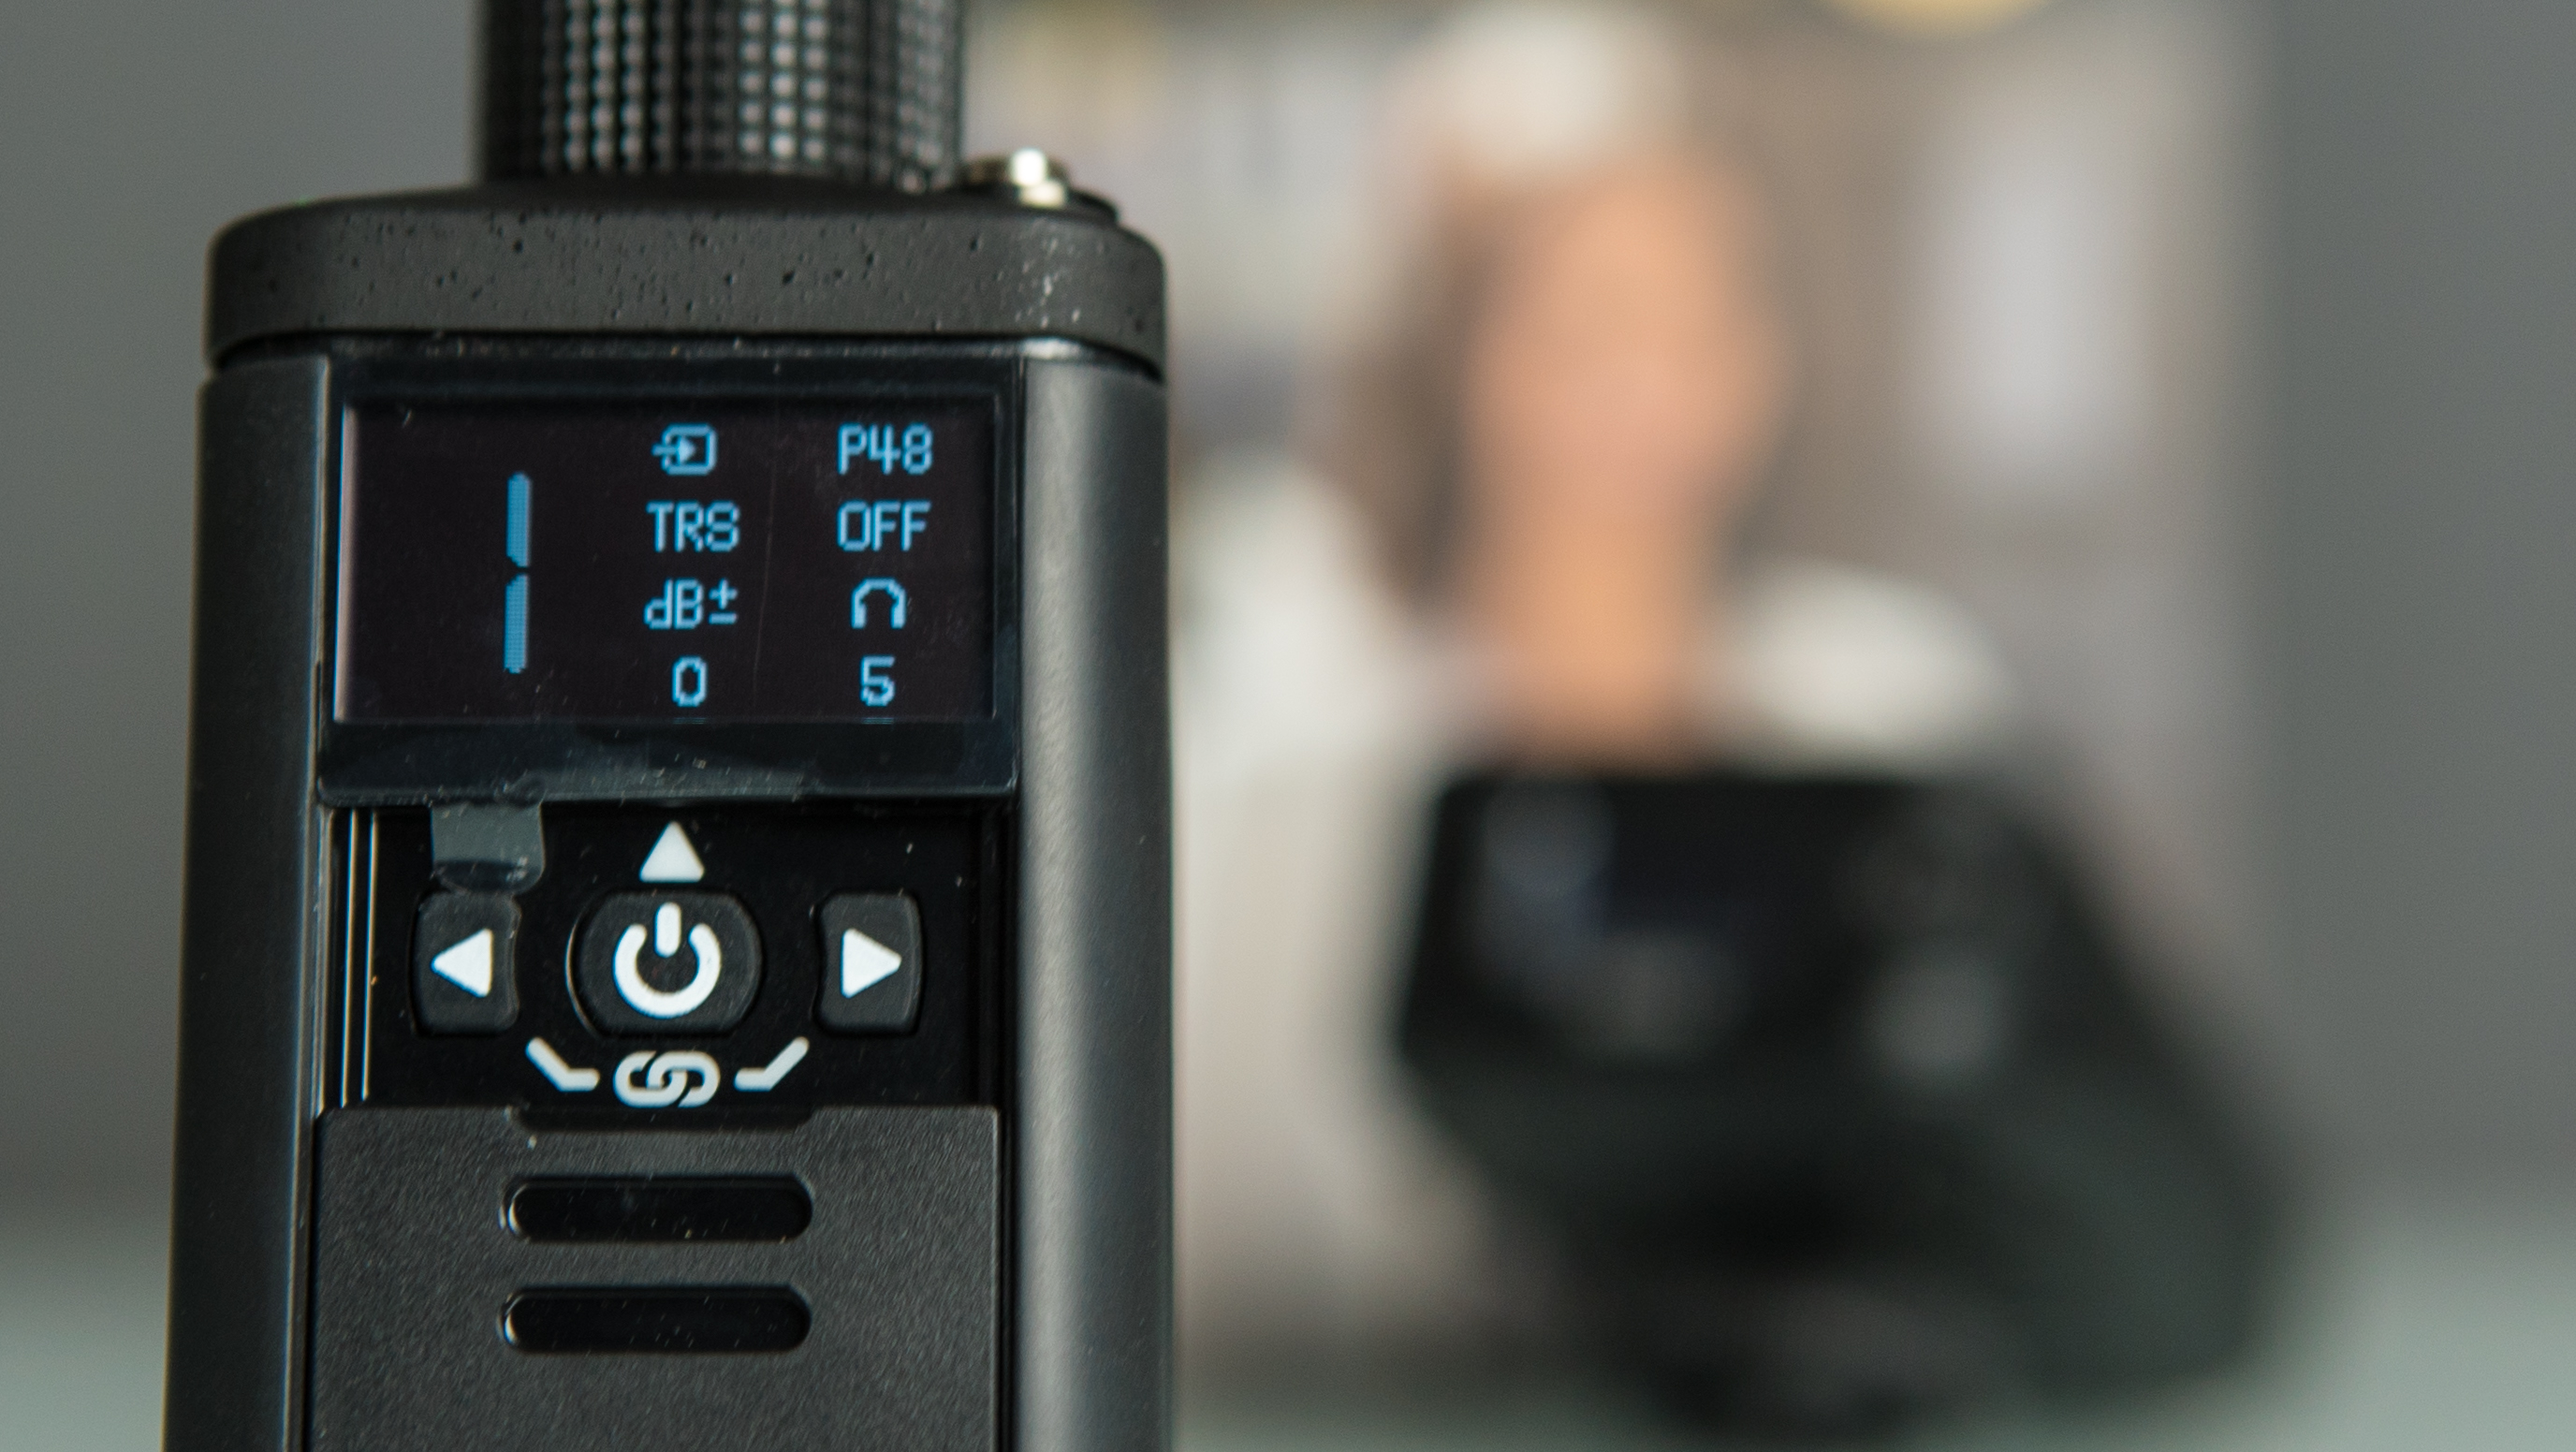 RØDE RodeLink Newsshooter Kit Review - For A Fistful of Features